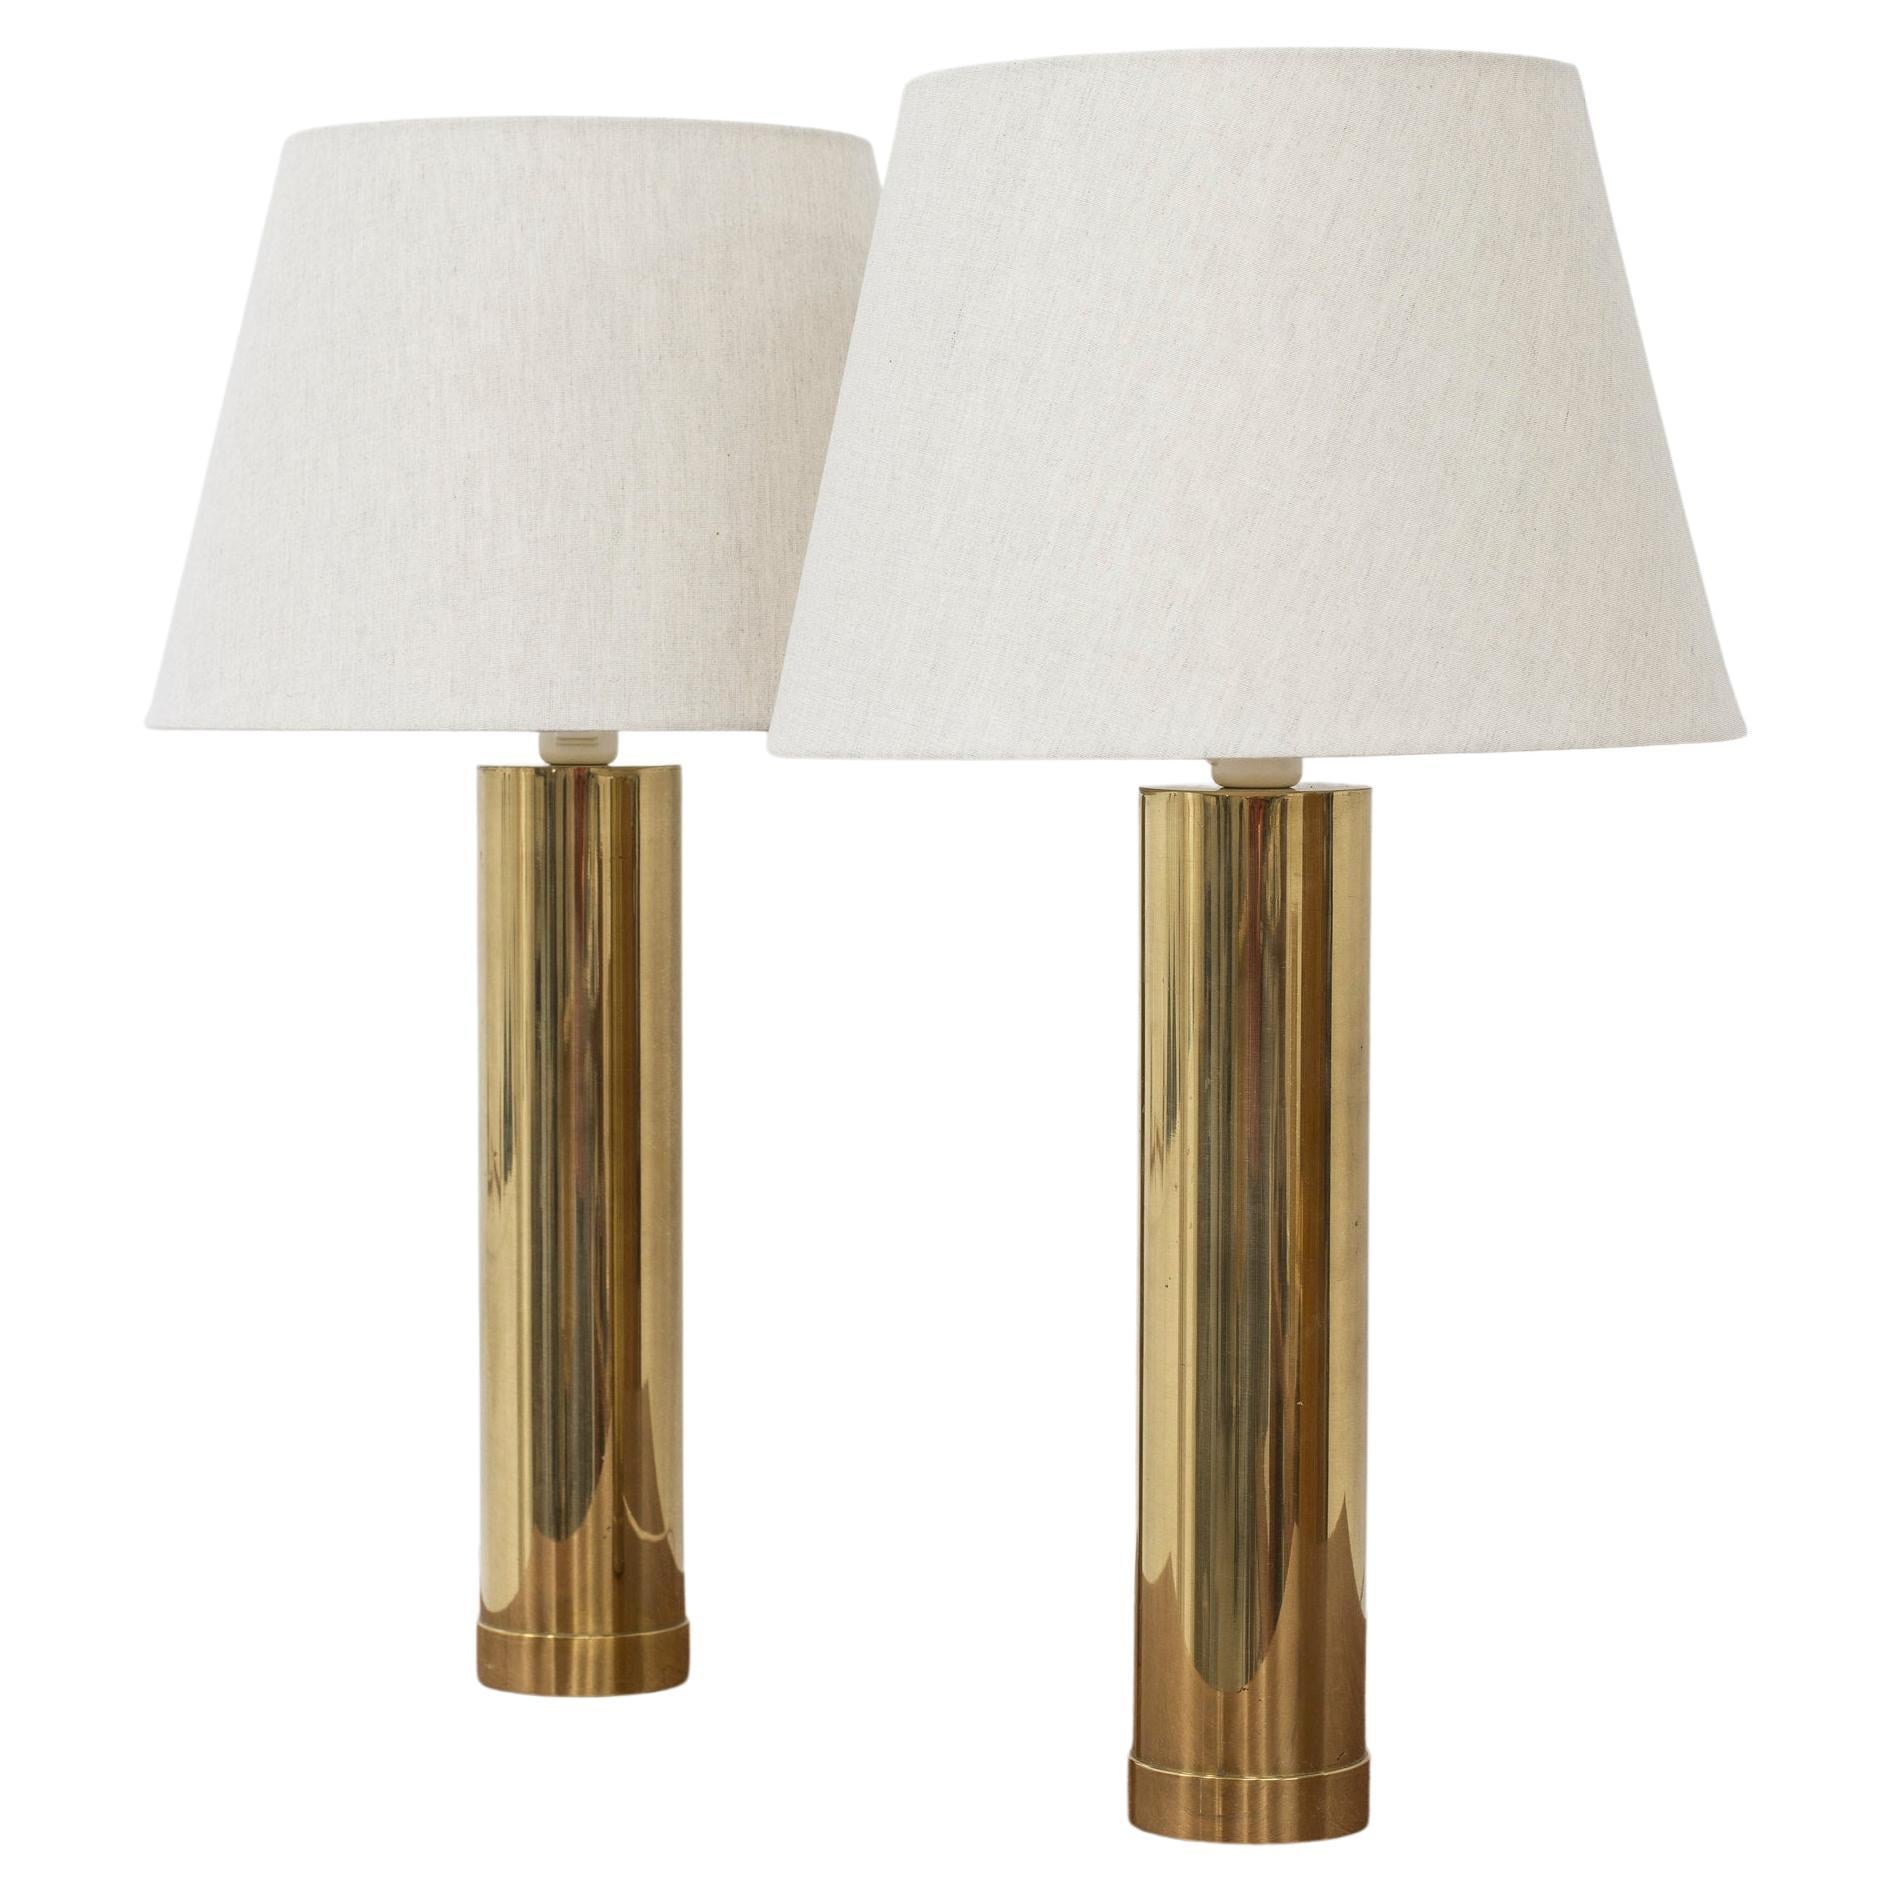 Pair of Brass Table Lamps by Bergboms, Sweden, 1960s, 4 Pcs Total For Sale